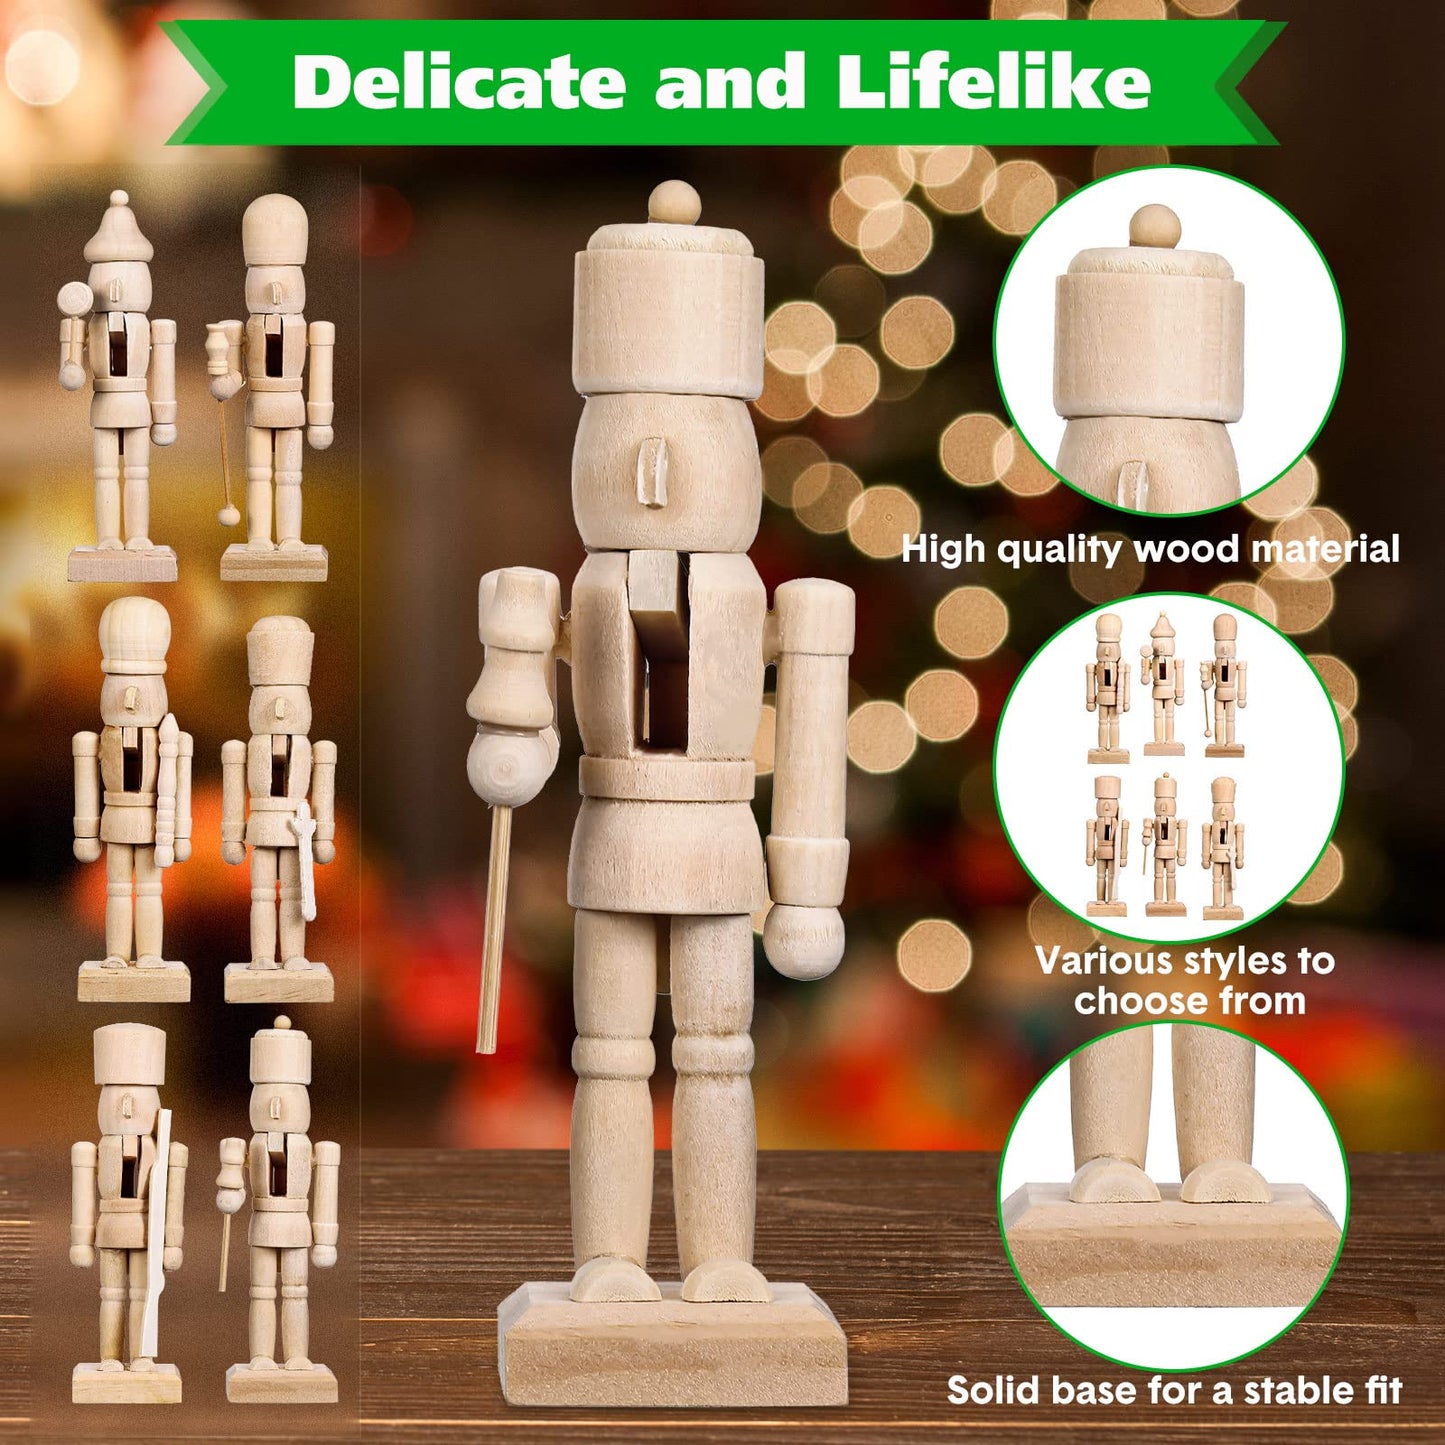 29 Pcs Christmas Wooden Unfinished Nutcracker Figures Nutcracker Ornament Kit Unpainted Nutcracker DIY Blank Paint Toy Nutcracker Soldier with Paint